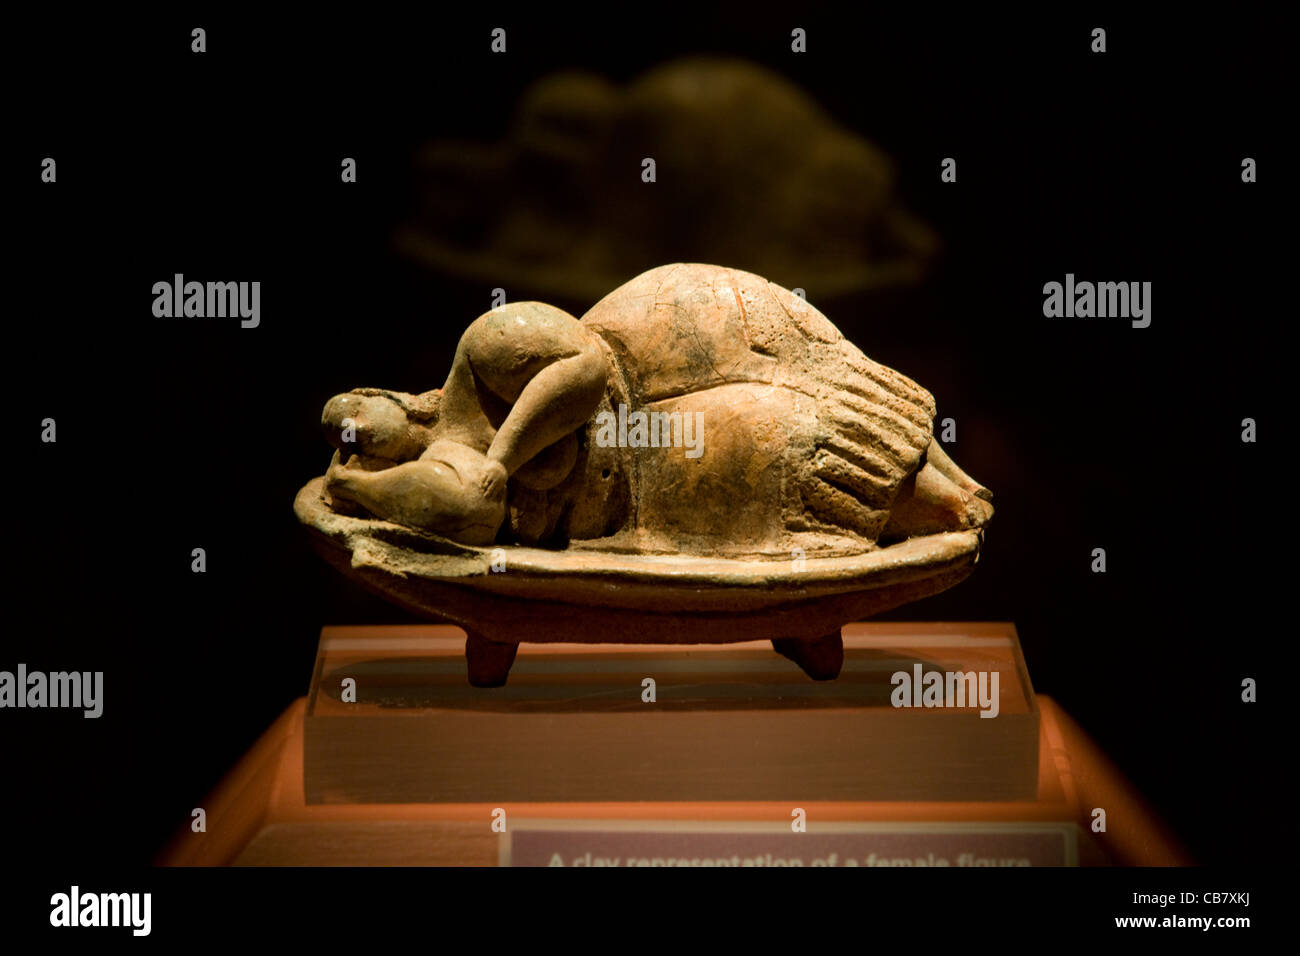 Valletta: National Museum of Archaeology - 'Sleeping Lady' Stock Photo